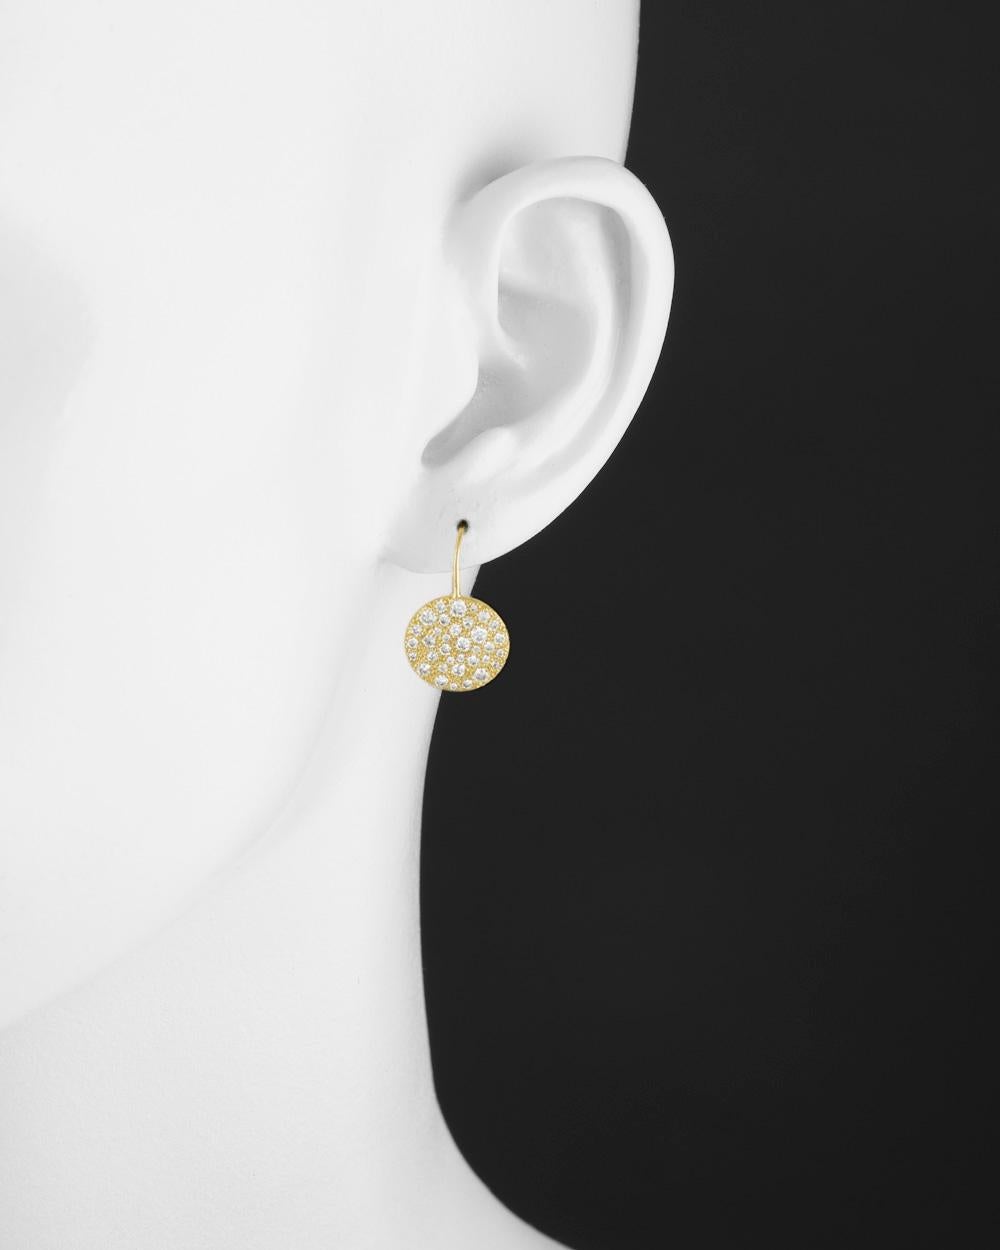 Circle drop earrings in polished 18k yellow gold, pavé-set with various-sized round-cut diamonds weighing 1.20 total carats. Frenchwires with hinged leverbacks. 0.85